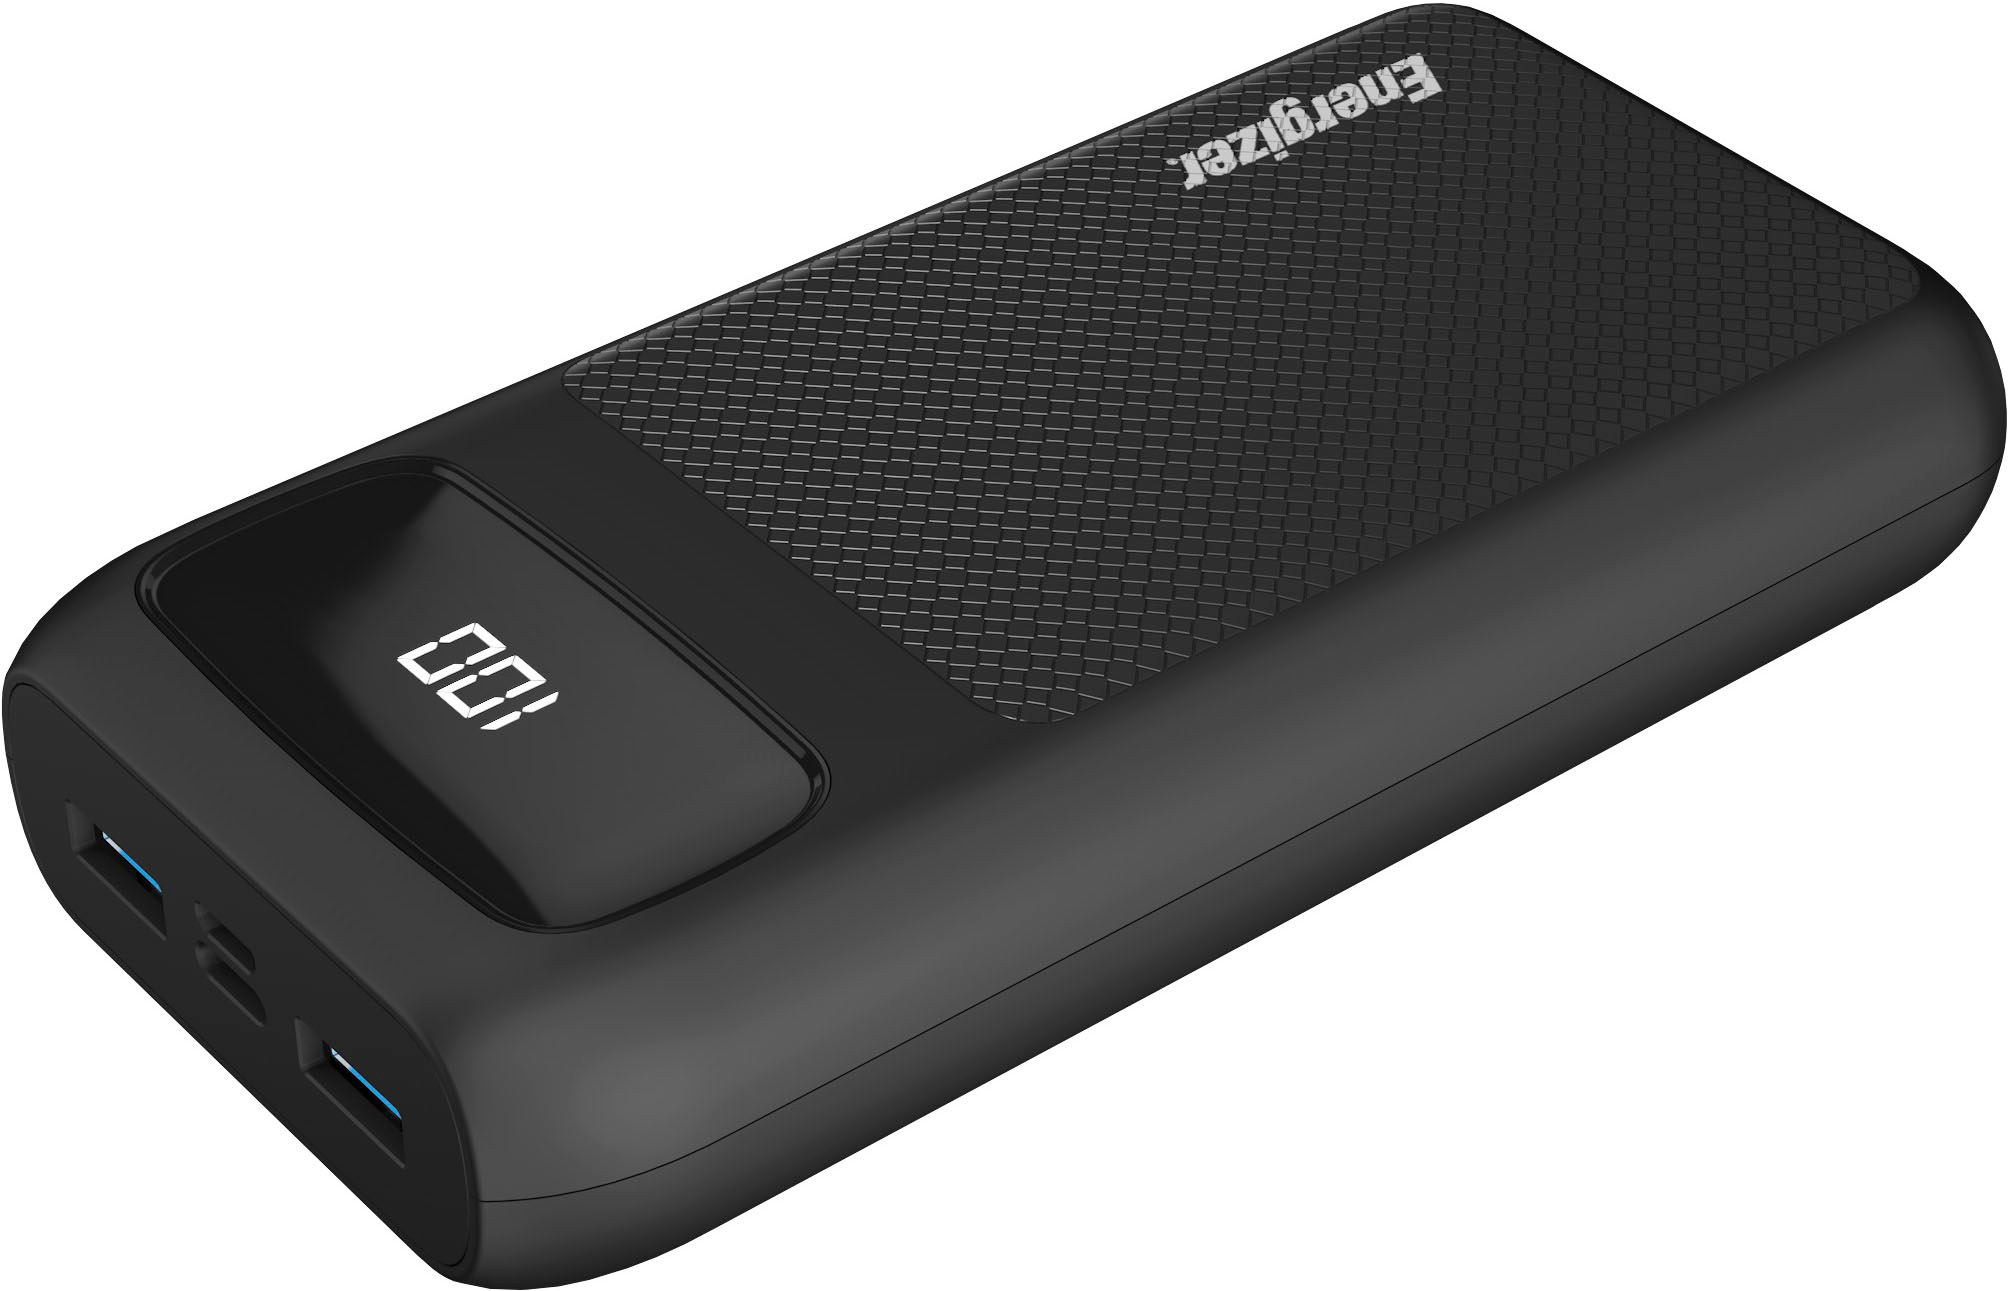 Energizer Power Bank with Built in Lightning connector 4000mAh for